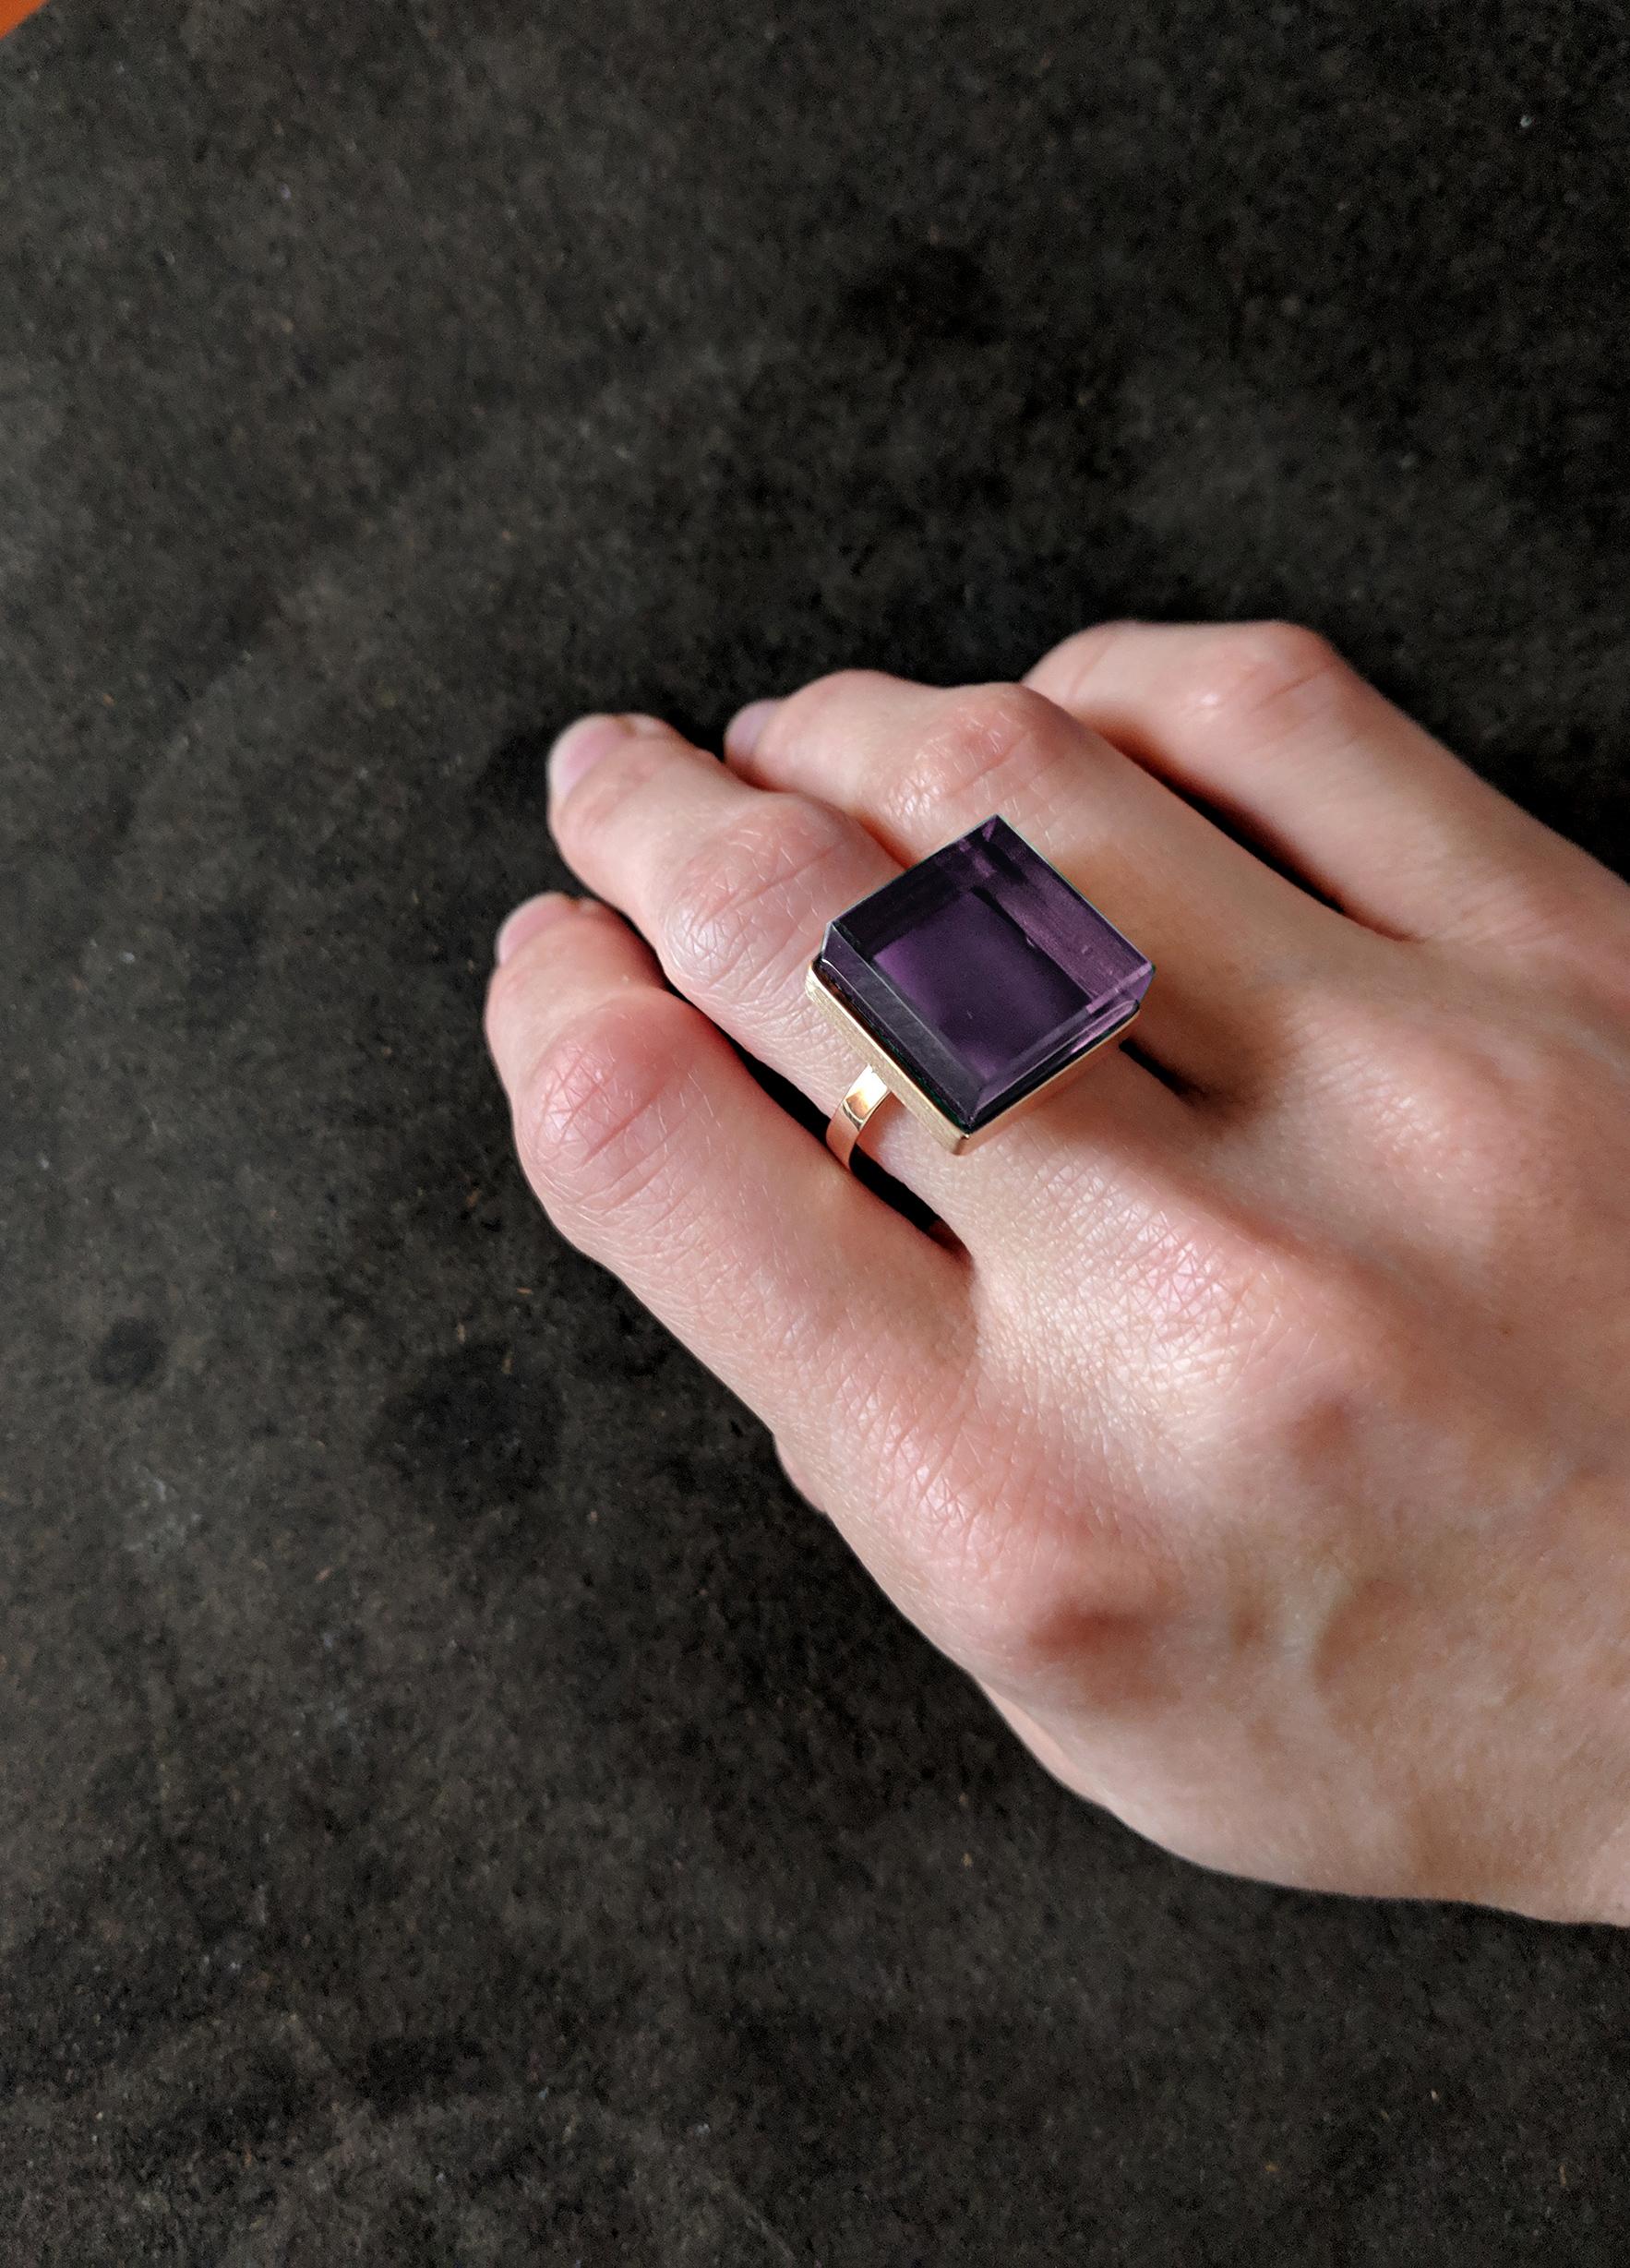 This stunning ring is made of yellow gold-plated sterling silver and boasts a vibrant 15x15x8 mm natural amethyst. It has been featured in prestigious publications such as Harper's Bazaar and Vogue UA.

This ring is not only a beautiful piece of